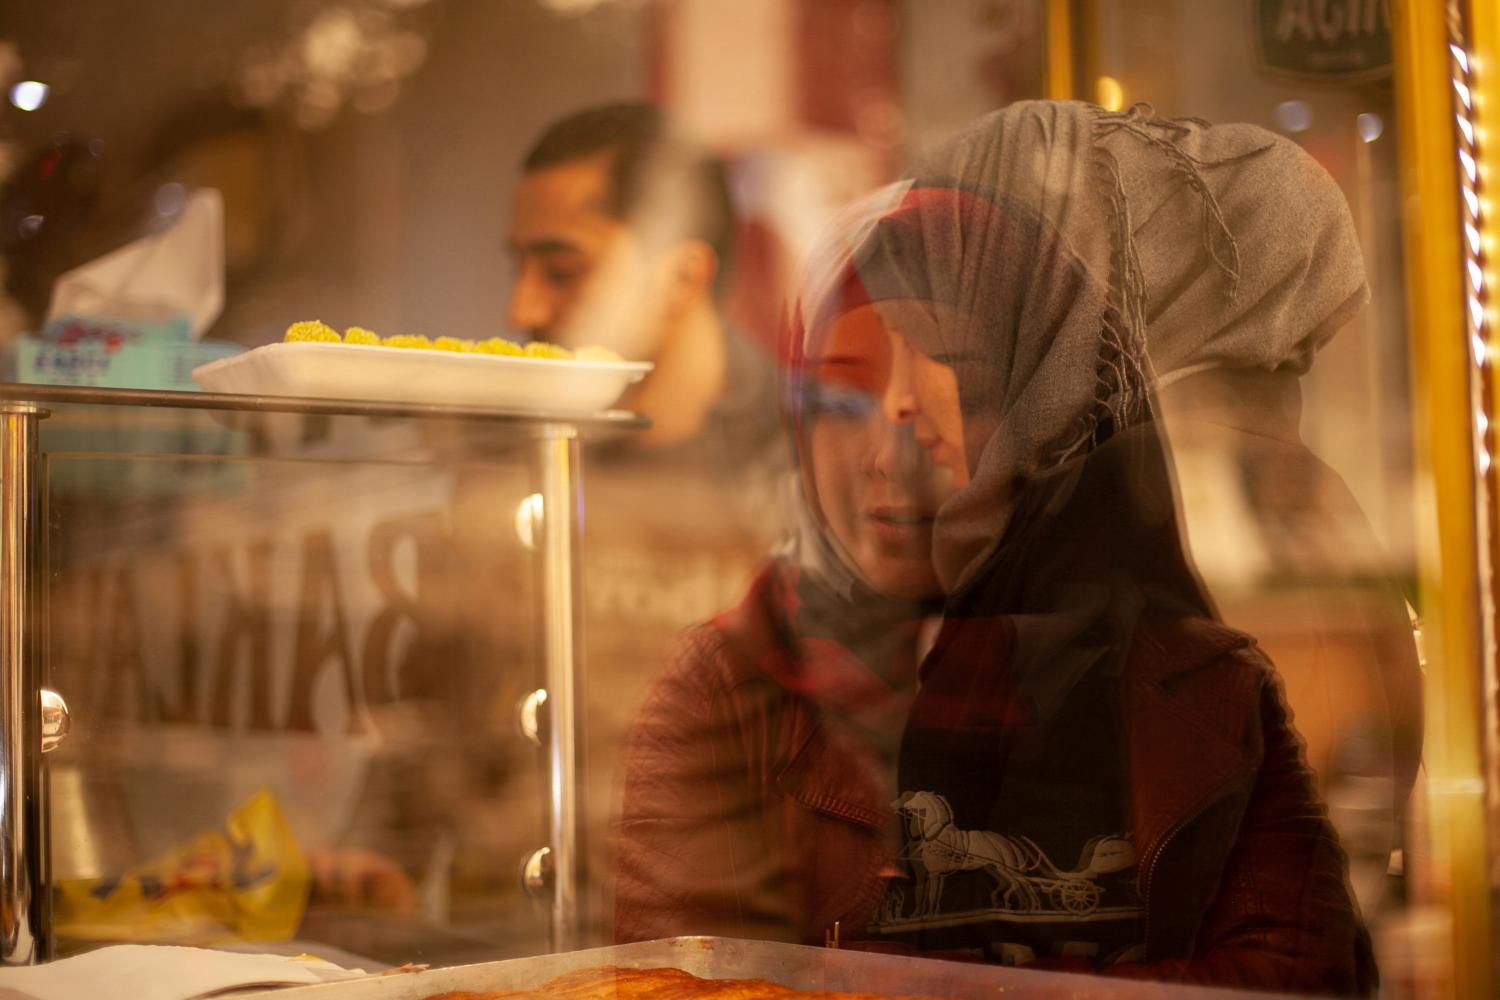 Palestinian-Syrian refugee Ahmed, 27, his future wife Hanin, 18, and Hanin's mother Turki visit a pastry shop the day before their engagement party in Kilis, Turkey, March 10, 2017. Ahmed's and Hanin's journey started amid Syria's conflict and brought the two Palestinians from their homes in Damascus' suburbs to Turkey. They were introduced in the winter of 2017. As they lived in different cities, they texted for months before Ahmed took a 20-hour bus trip from Izmir to the border town of Kilis to meet her, which led to their engagement. REUTERS/Ekaterina Anchevskaya     SEARCH "SYRIA MIGRANTS" FOR THIS STORY. SEARCH "WIDER IMAGE" FOR ALL STORIES. - RC1460F5A5A0